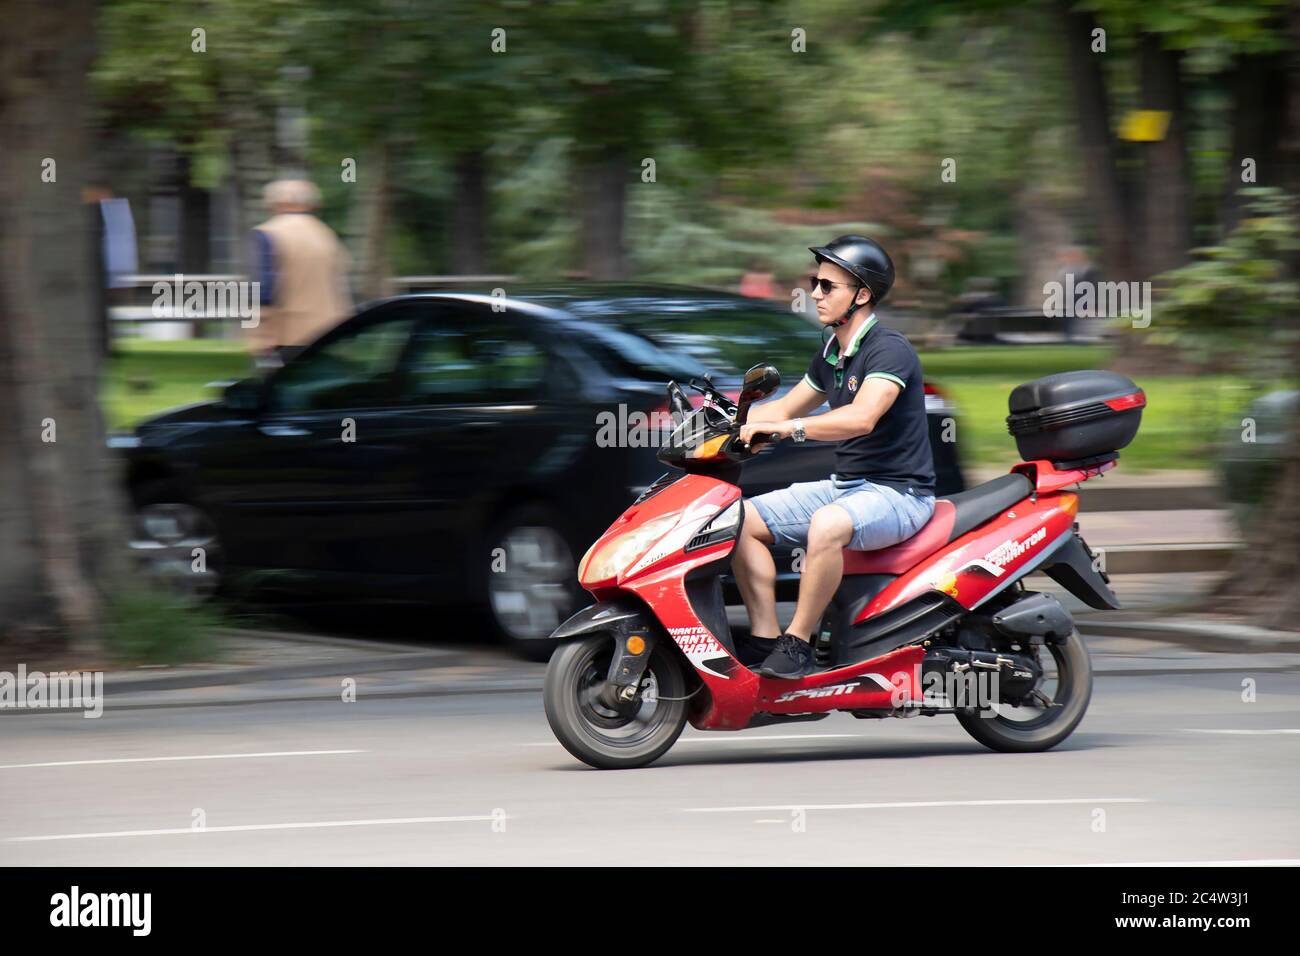 Belgrade, Serbia - June 25, 2020: Young man in shorts and t shirt riding red scooter with rear box on city street, side view Stock Photo